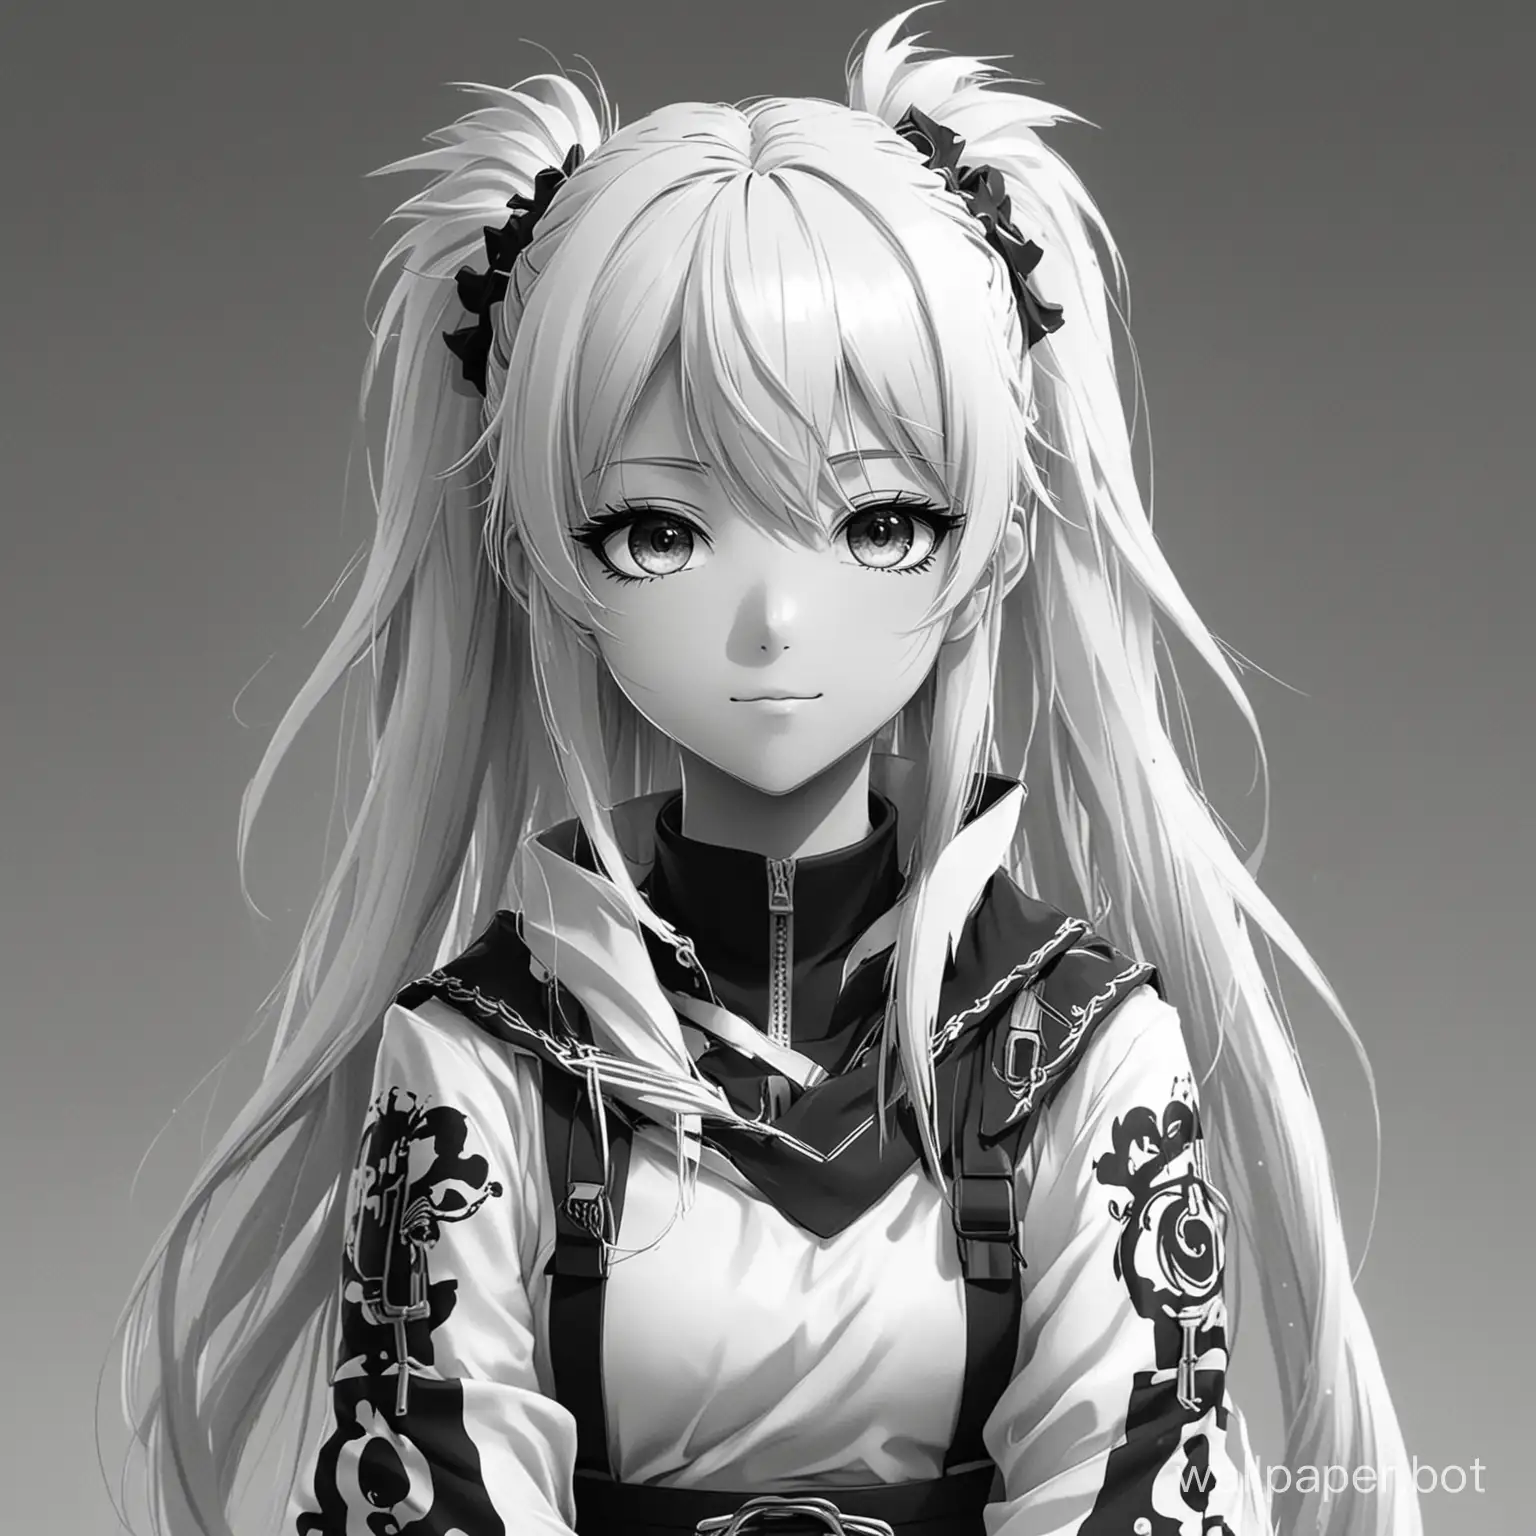 anime wallpaper in white and black style